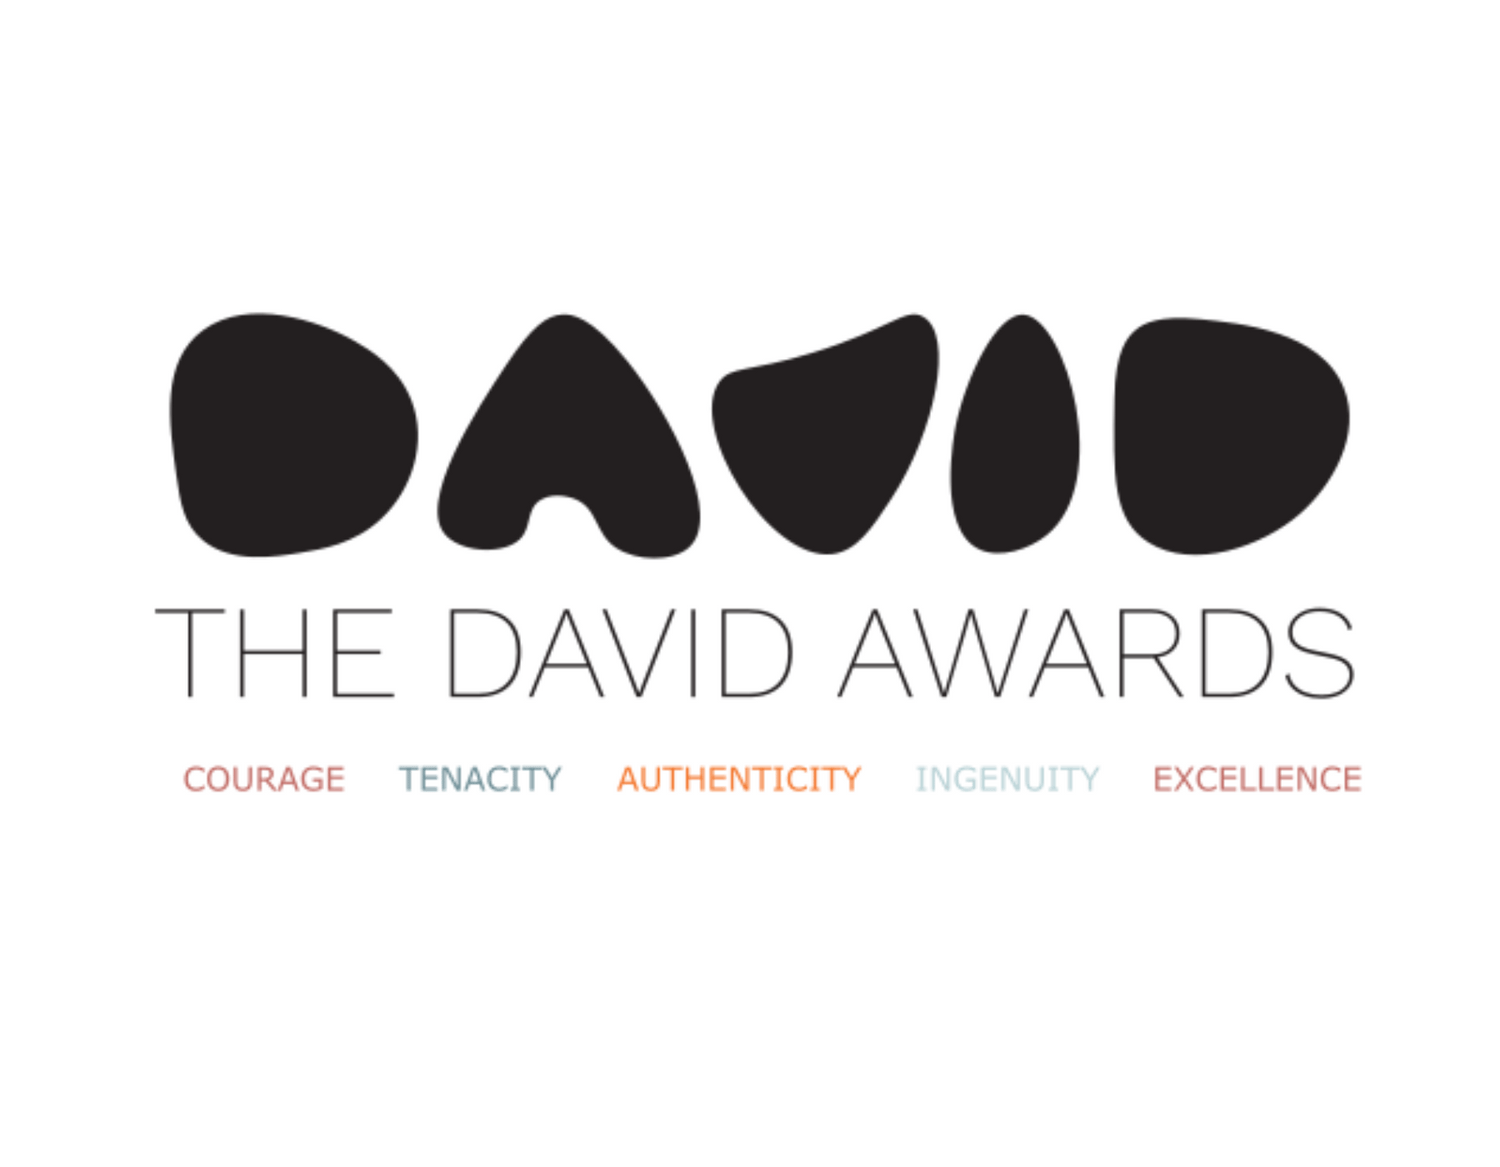 Black and White logo of the David Award. With their tag line "Corage Tenacity Authenticity Ingenuity Excellence".